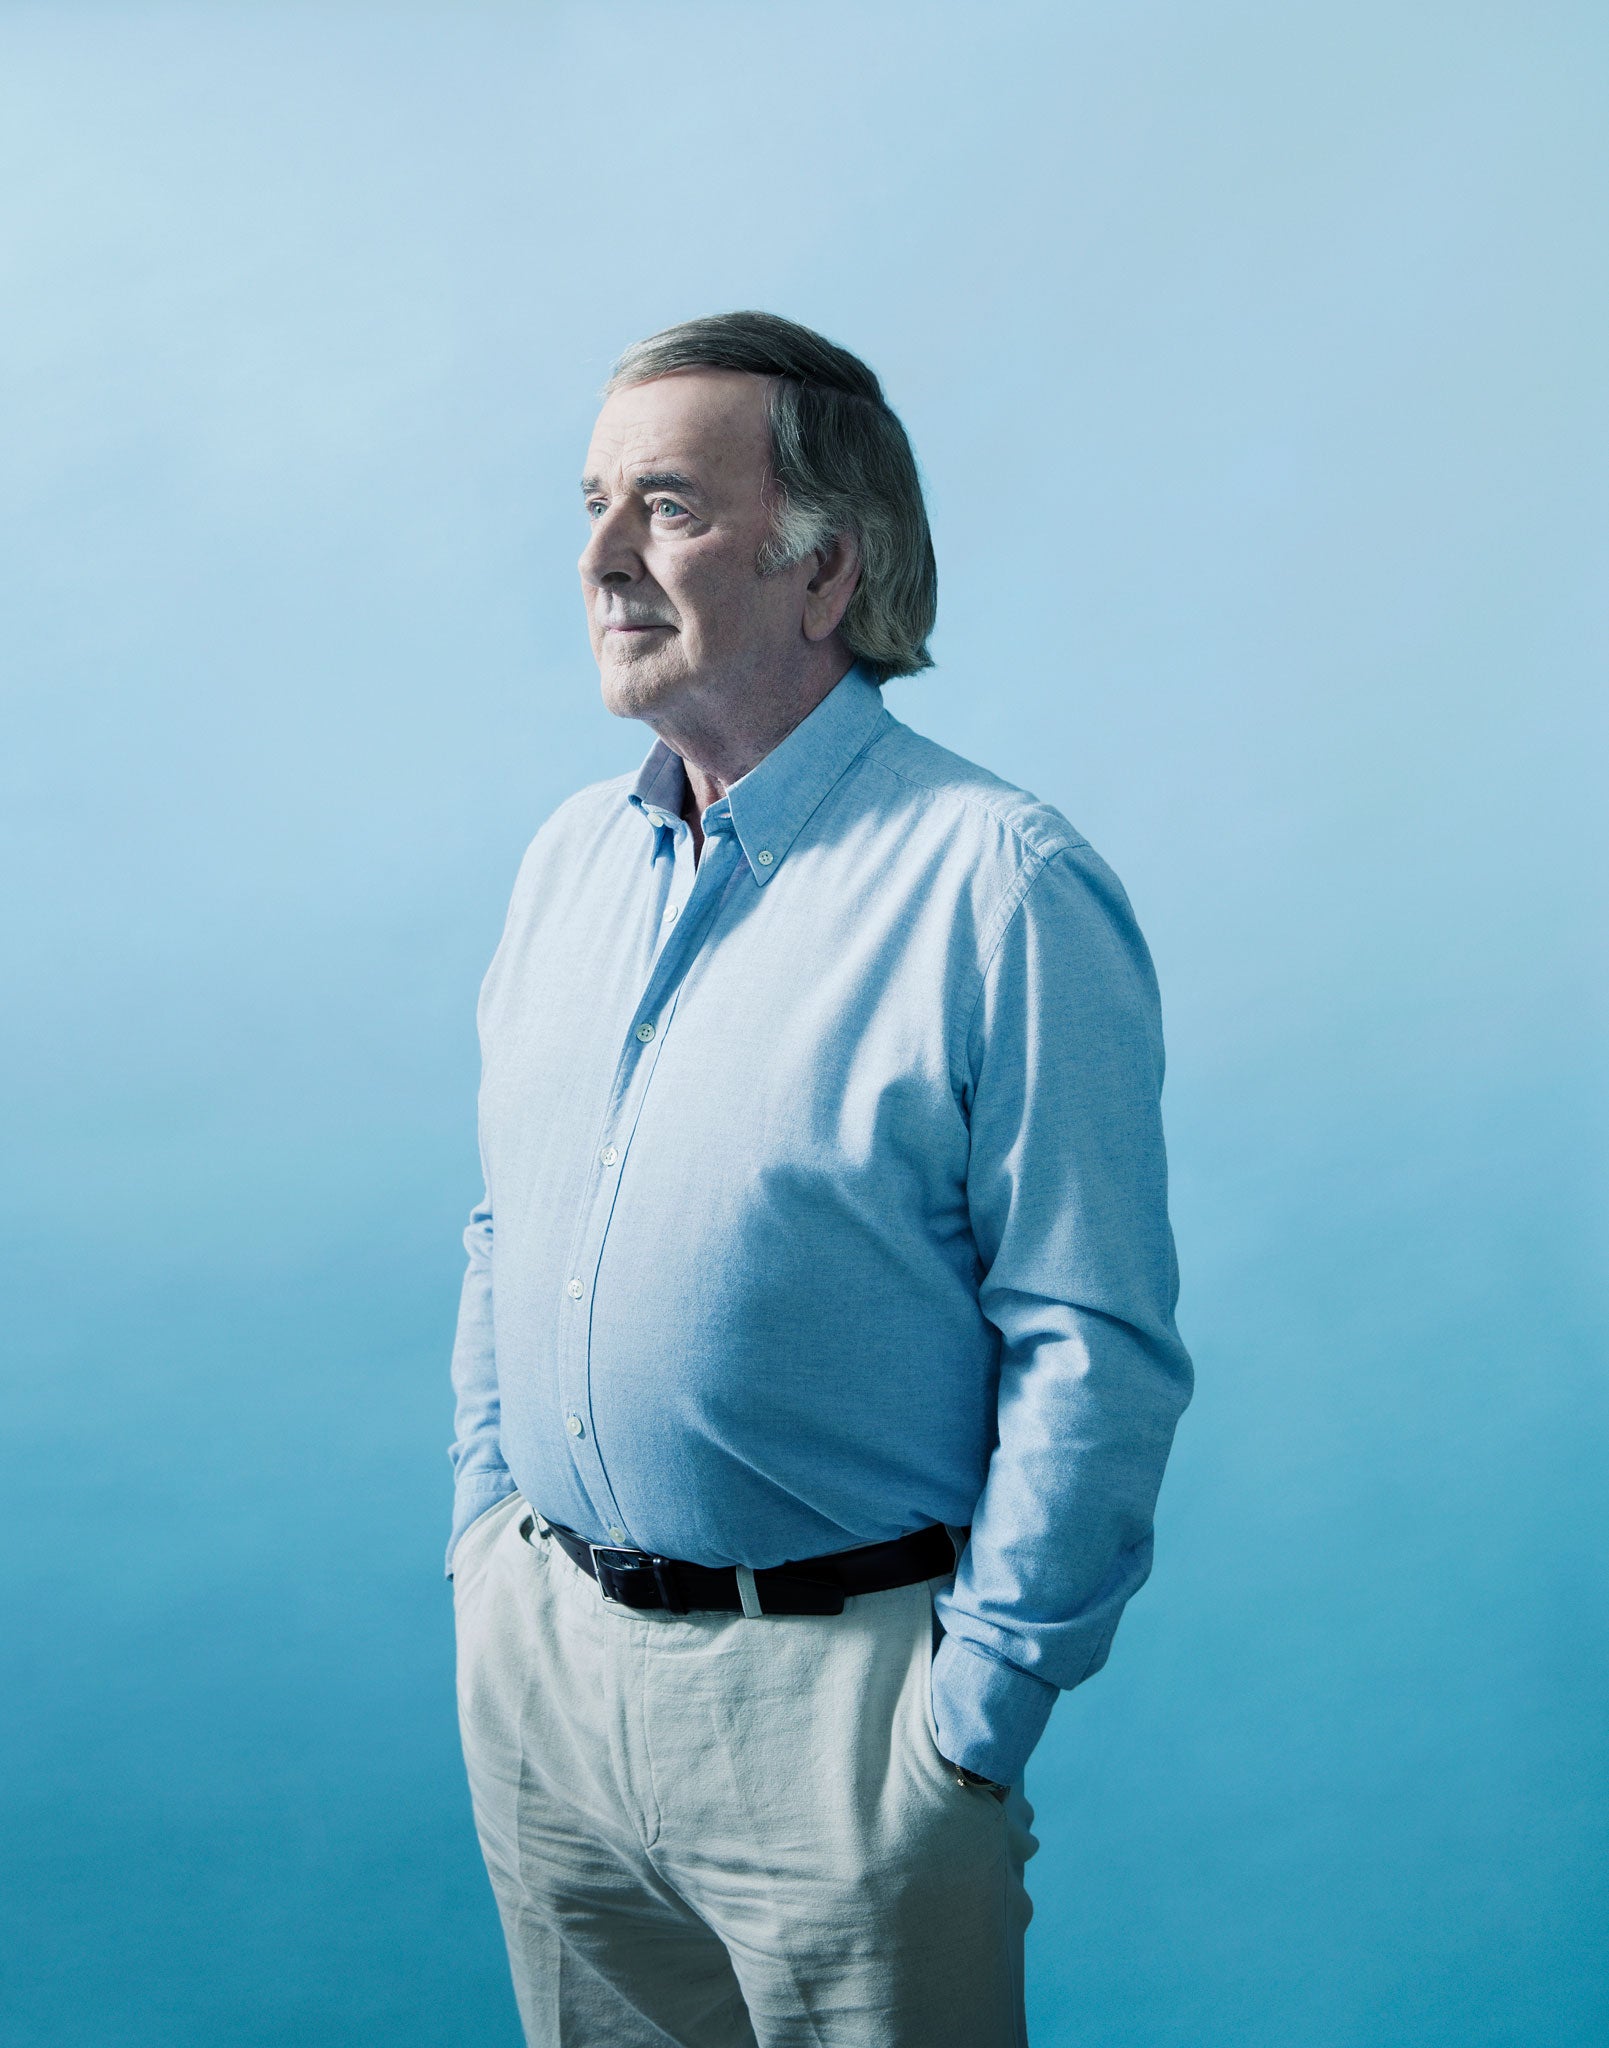 Terry Wogan presented the Eurovision Song Contest from 1971 to 1998